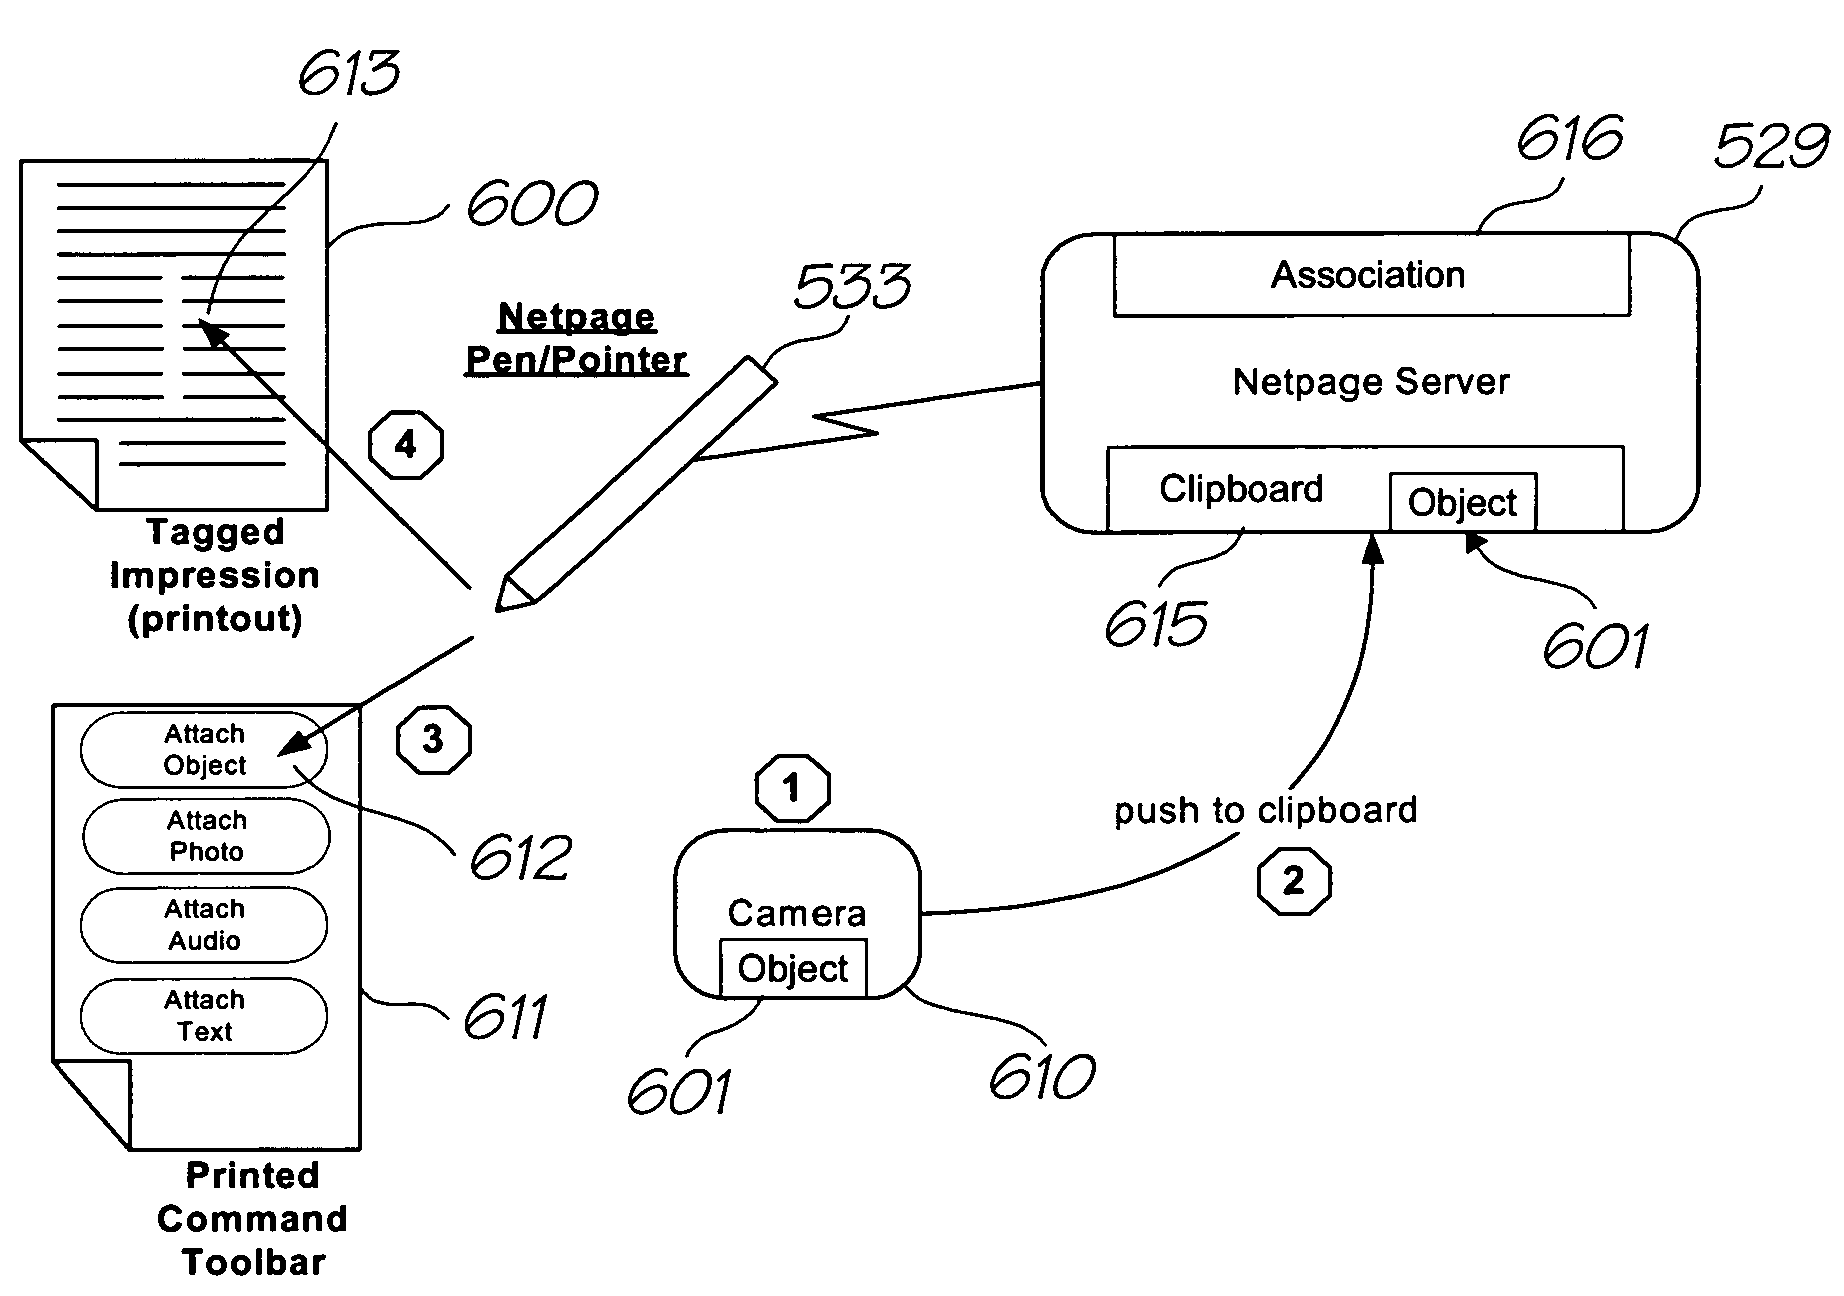 Method of downloading and installing a software object